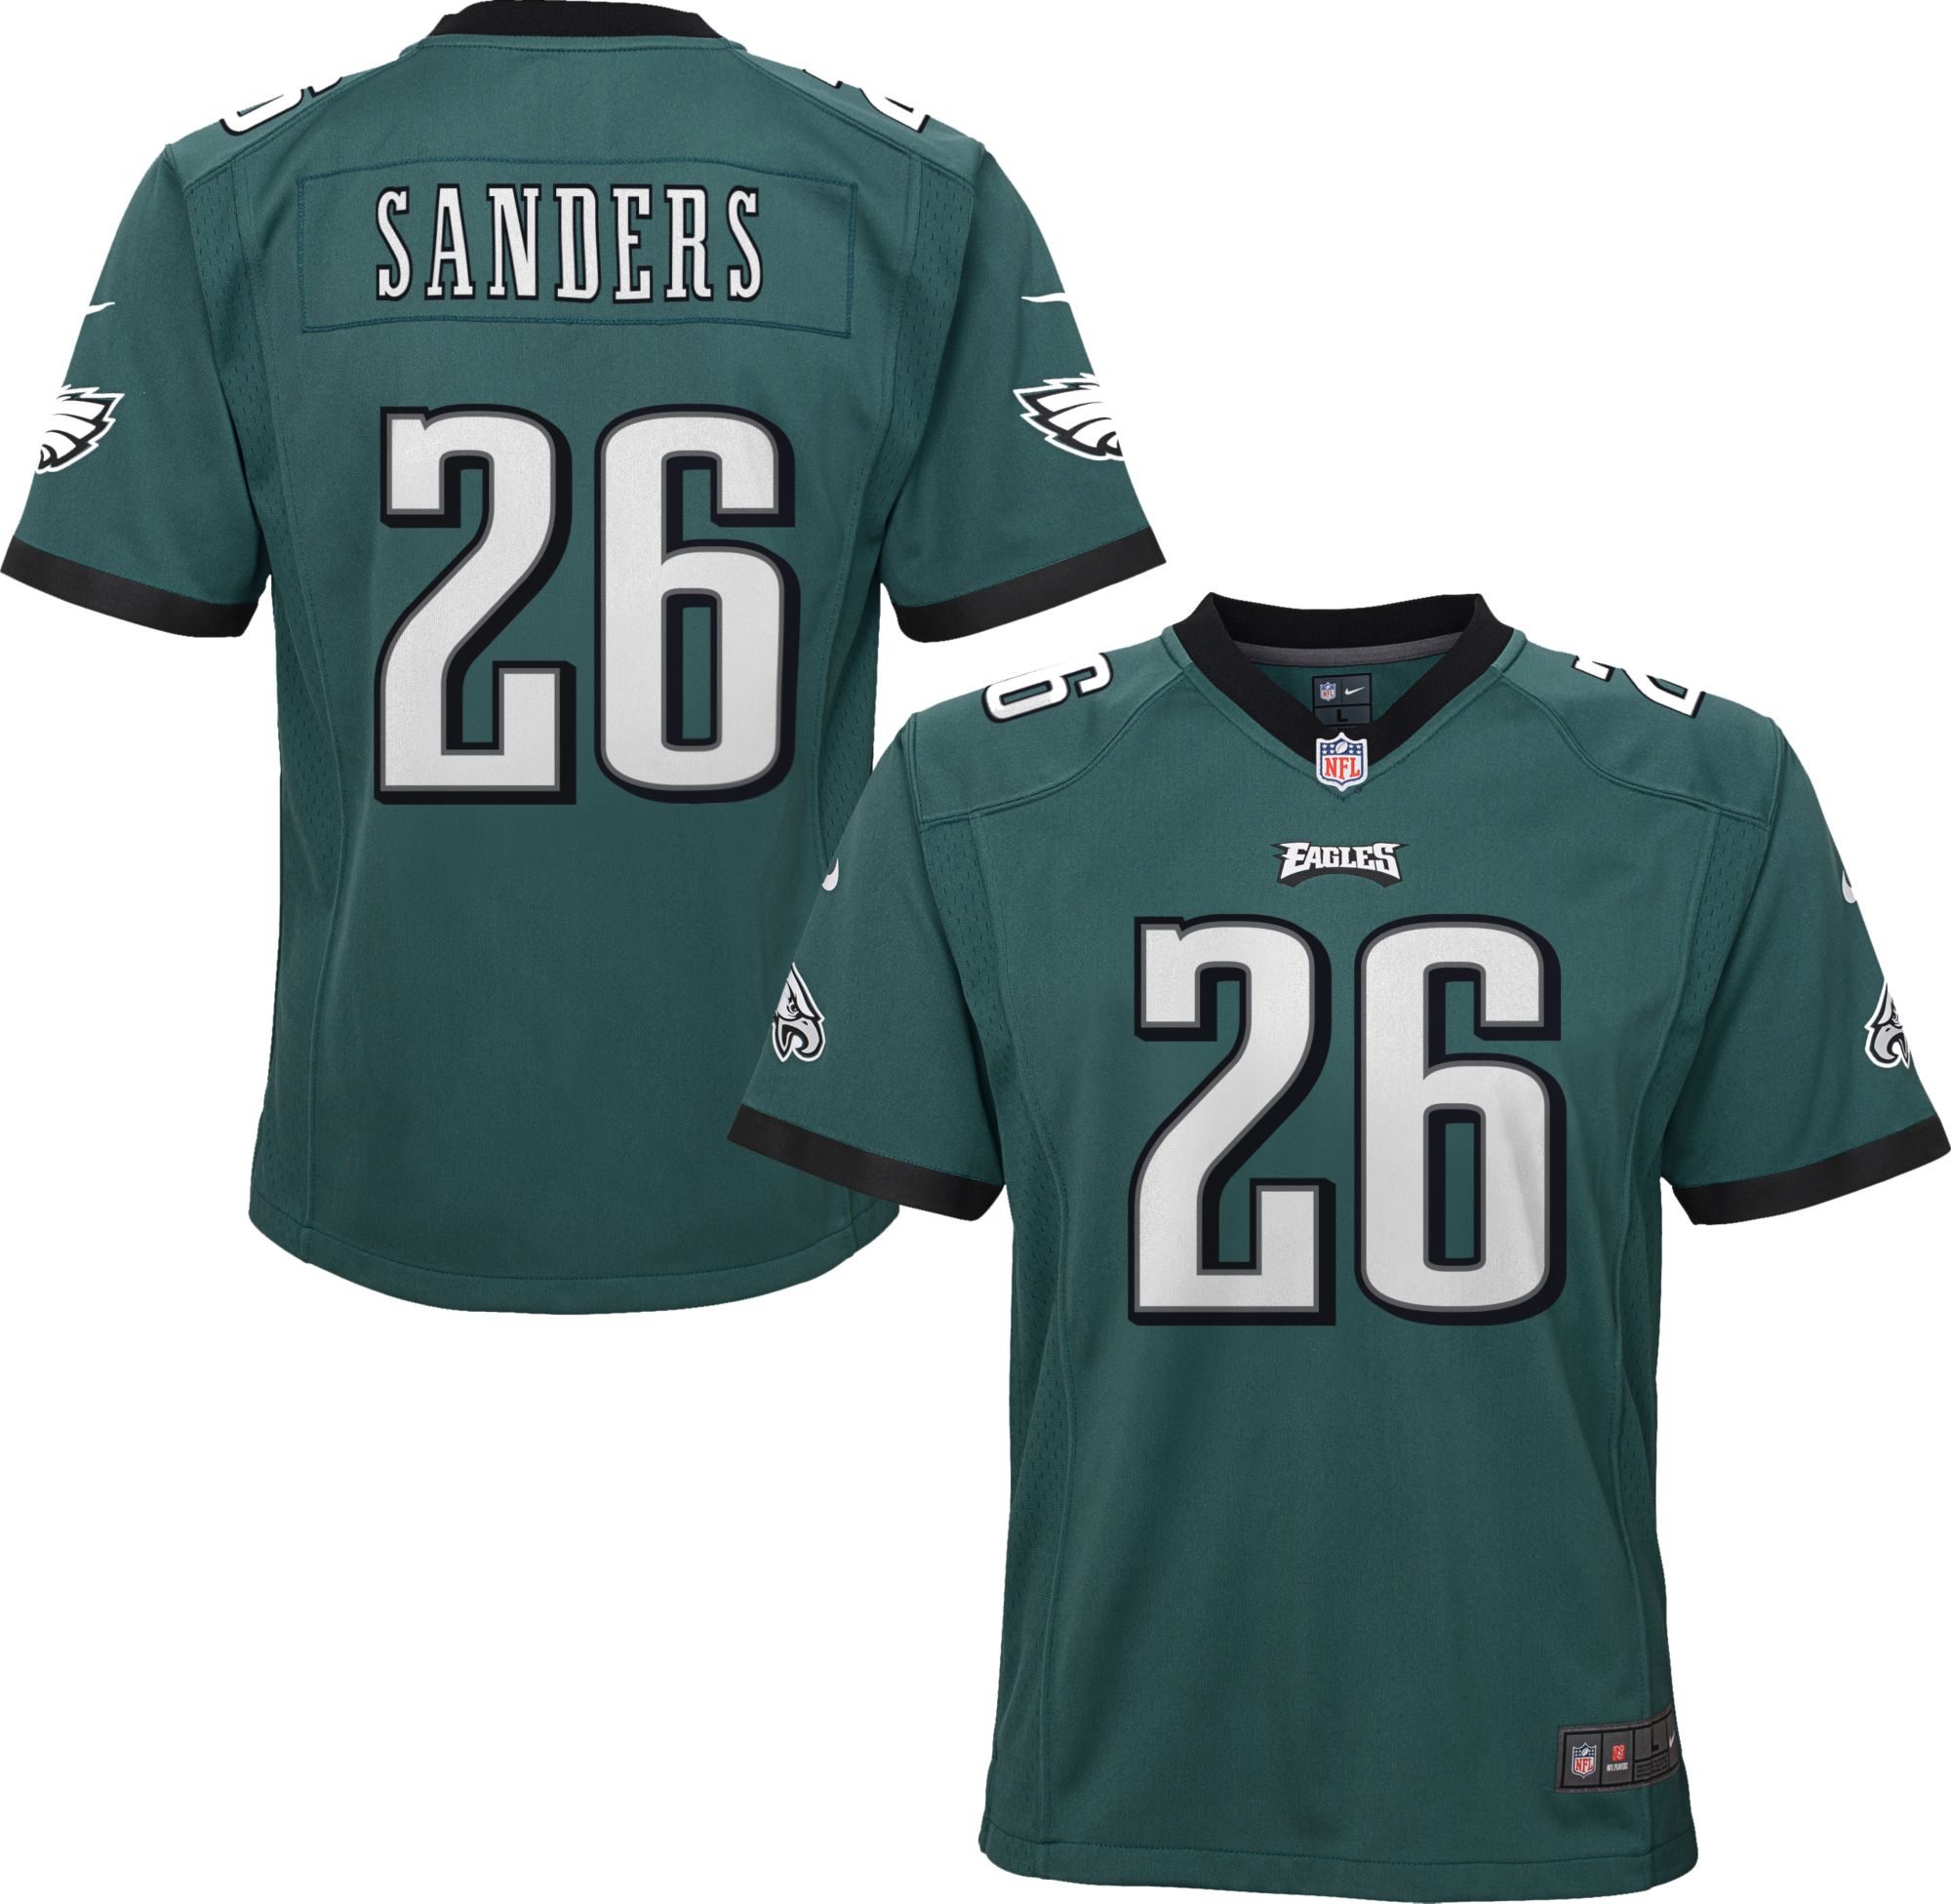 5t eagles jersey